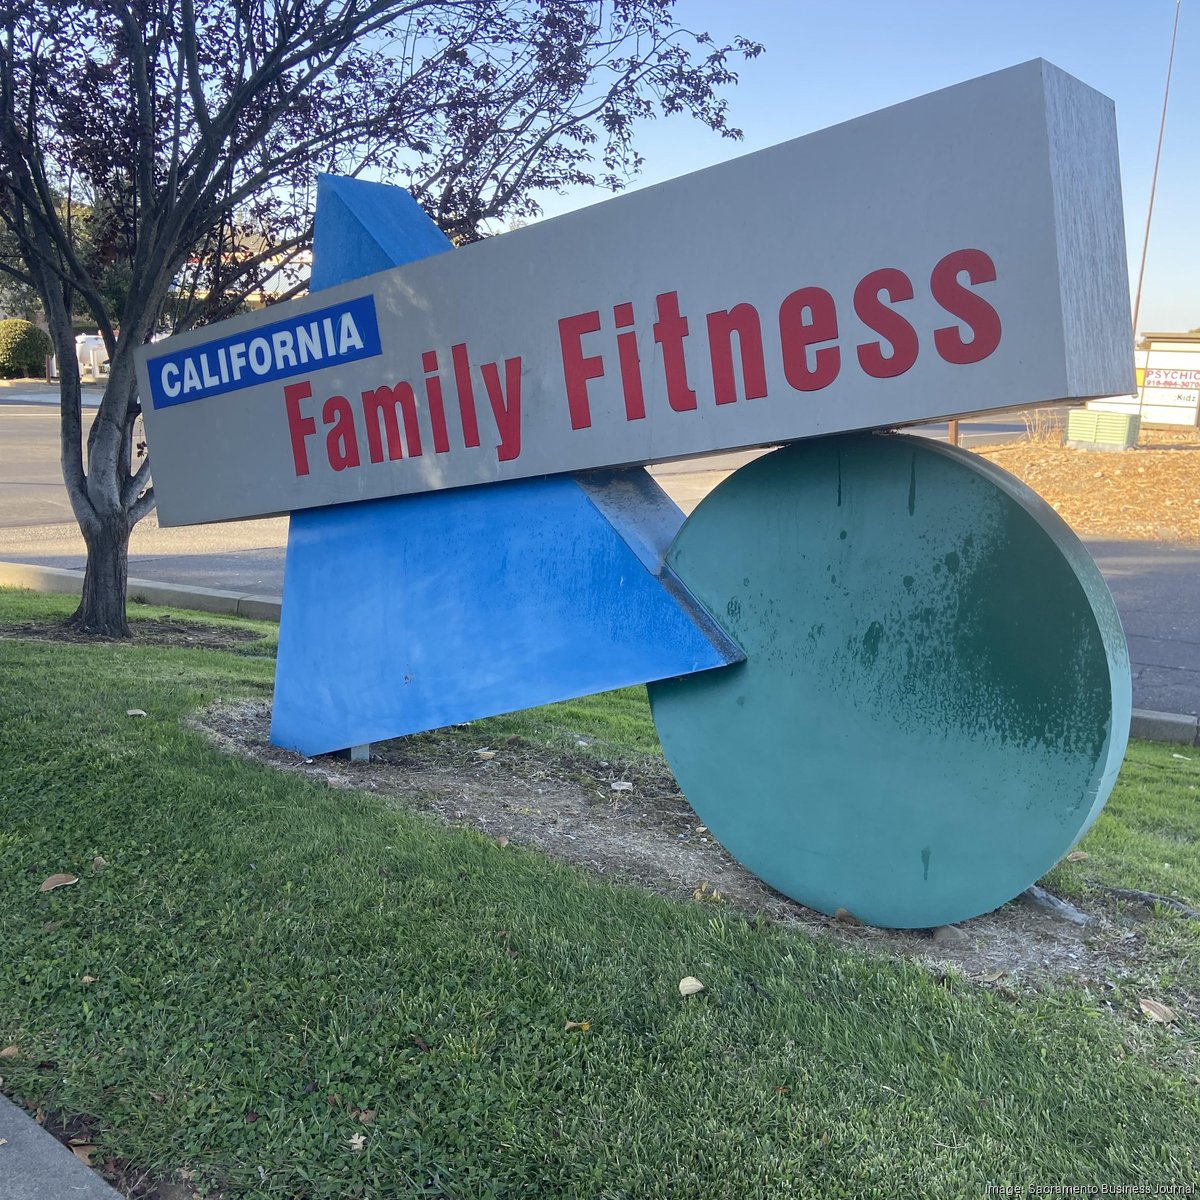 California Family Fitness Careers and Employment